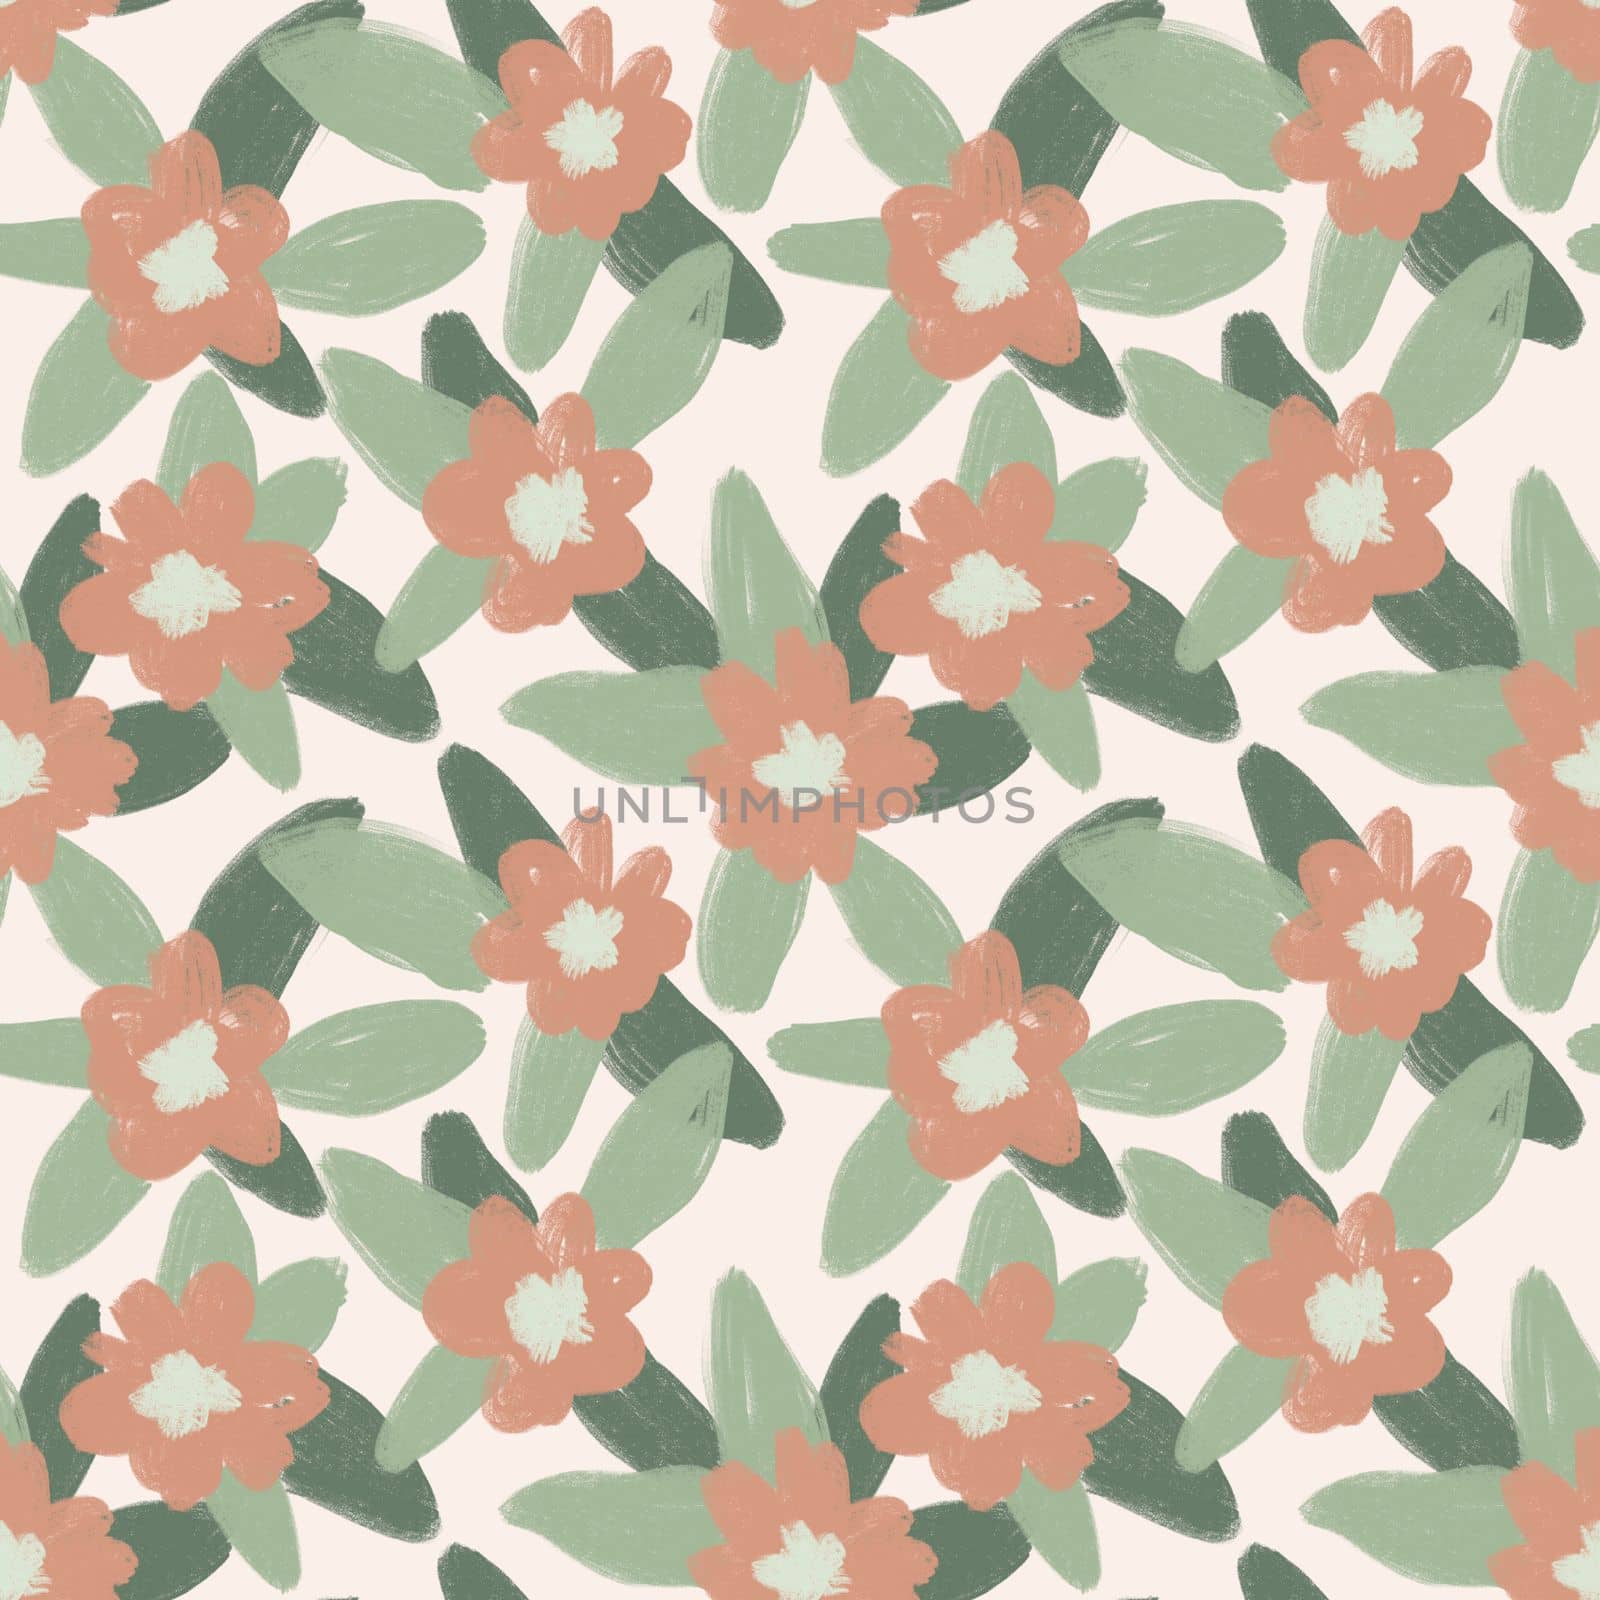 Hand drawn seamless pattern with muted pastel flowers, neutral beige sage green floral design. Boho bohemian trendy loose nature blossom bloom leaves, victorian retro garden print, retro romantic fabric for spring summer foliage. by Lagmar